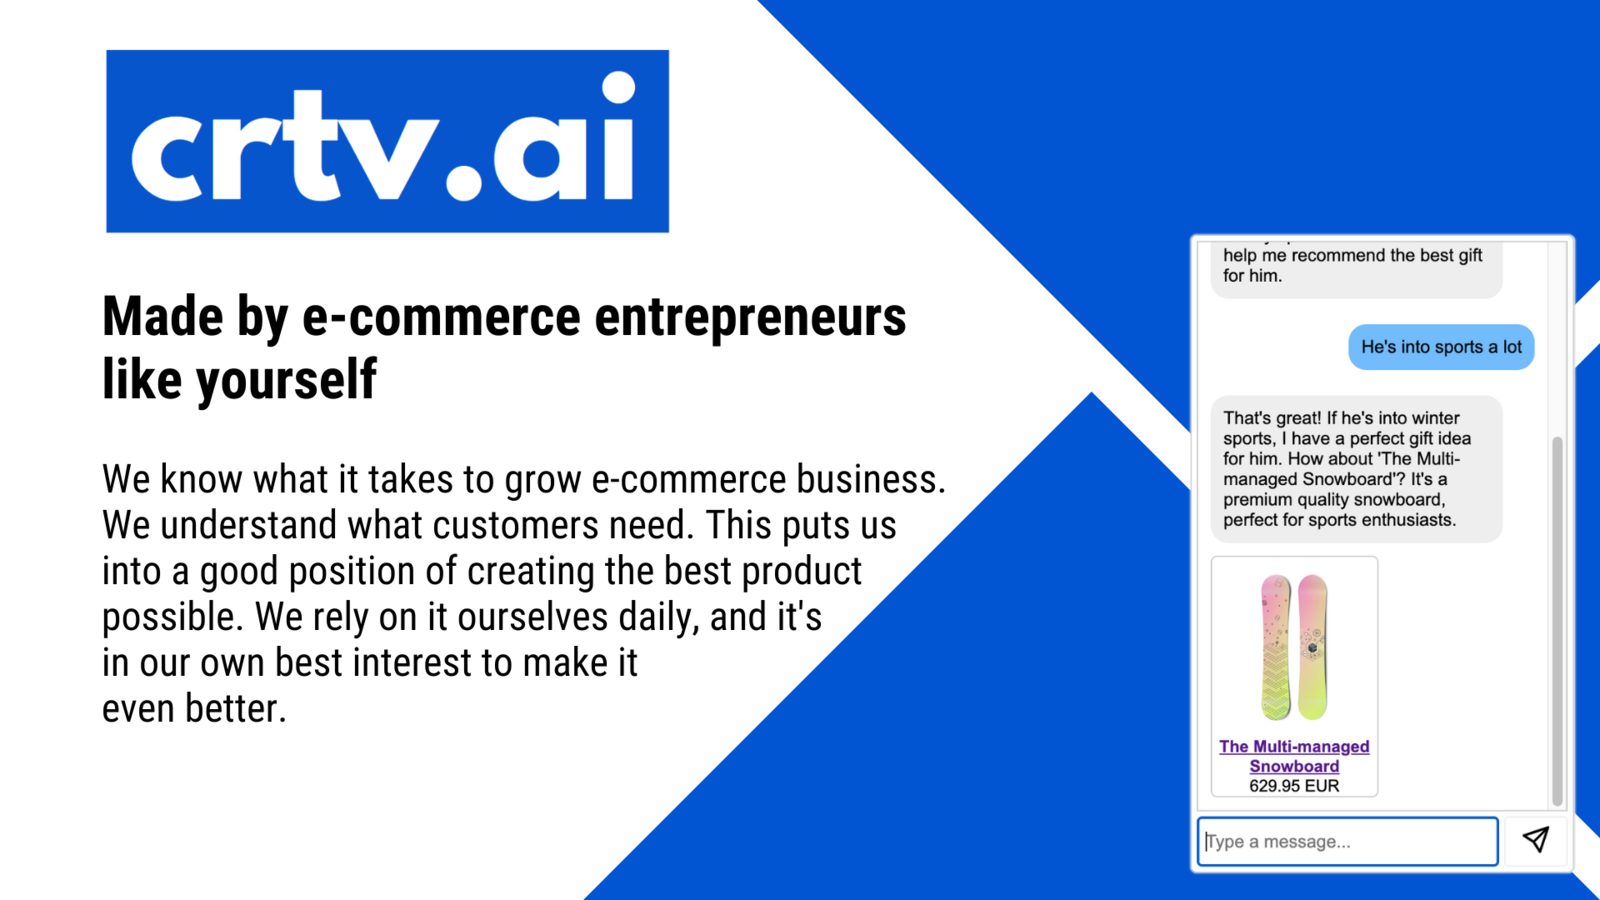 Made by e-commerce entrepreneurs like yourself